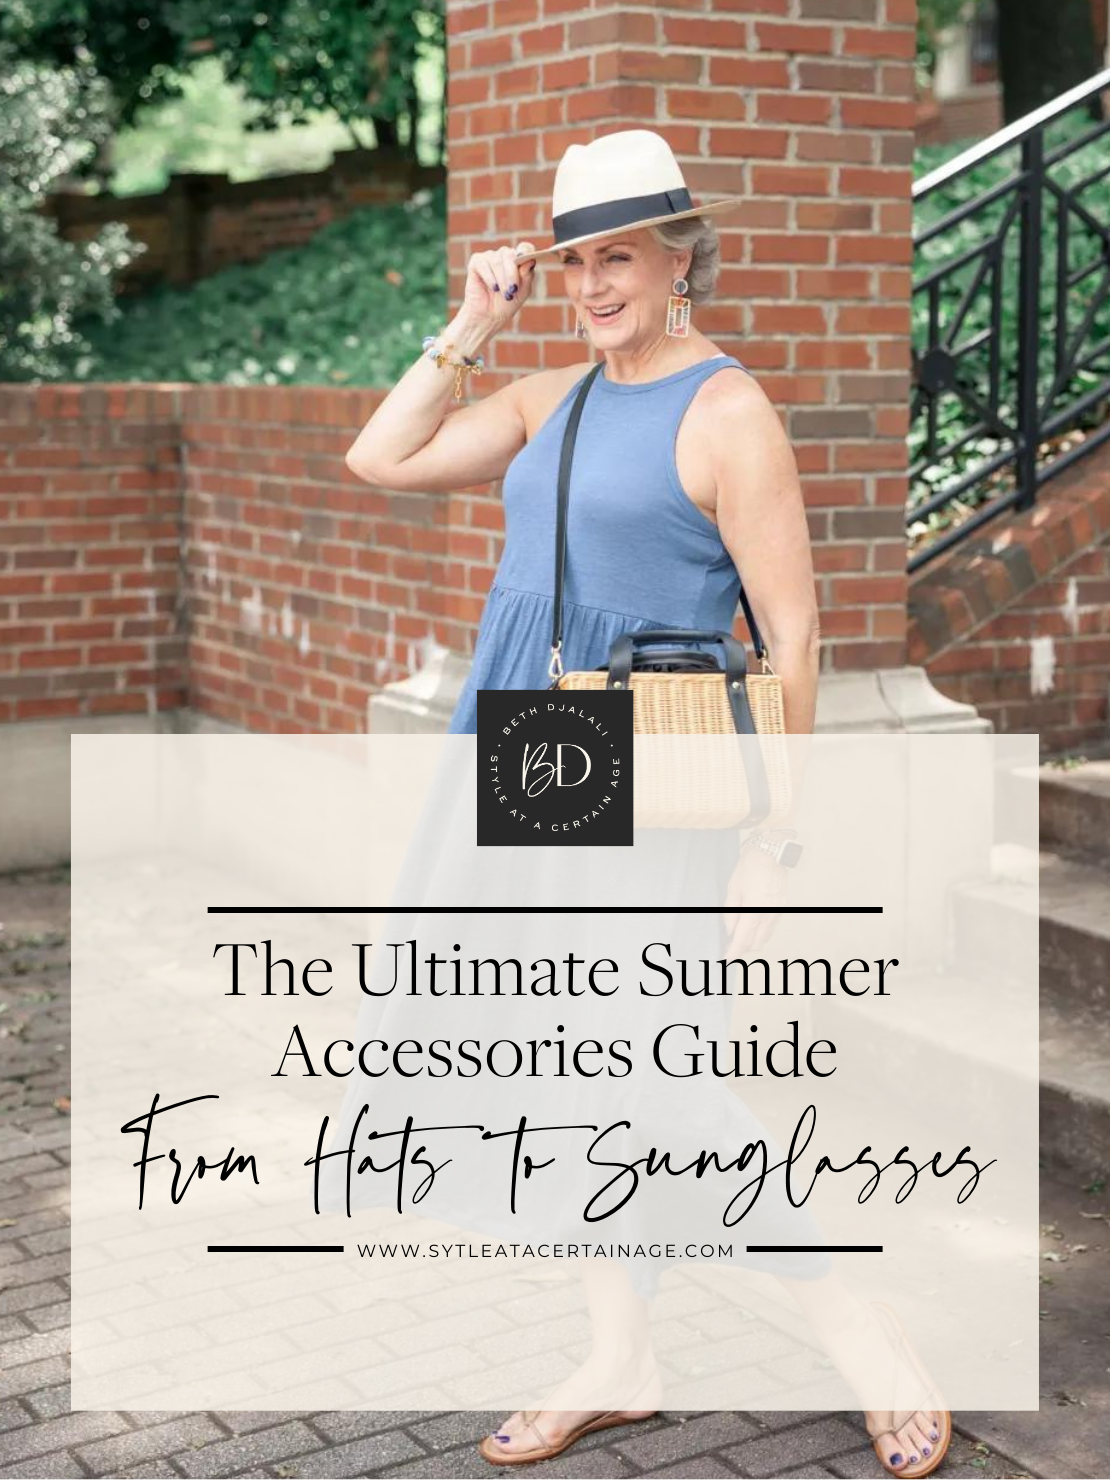 The Ultimate Summer Accessories Guide